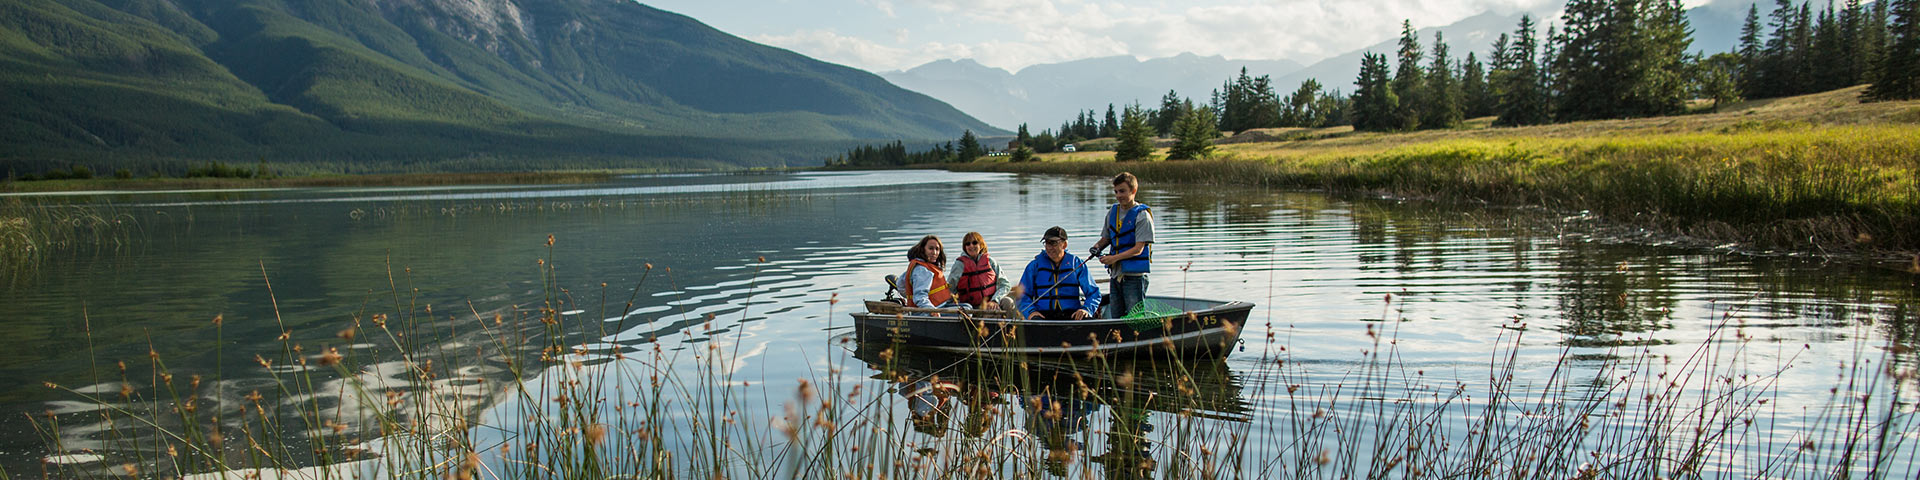 Family fishing from a boat on a mountain lake